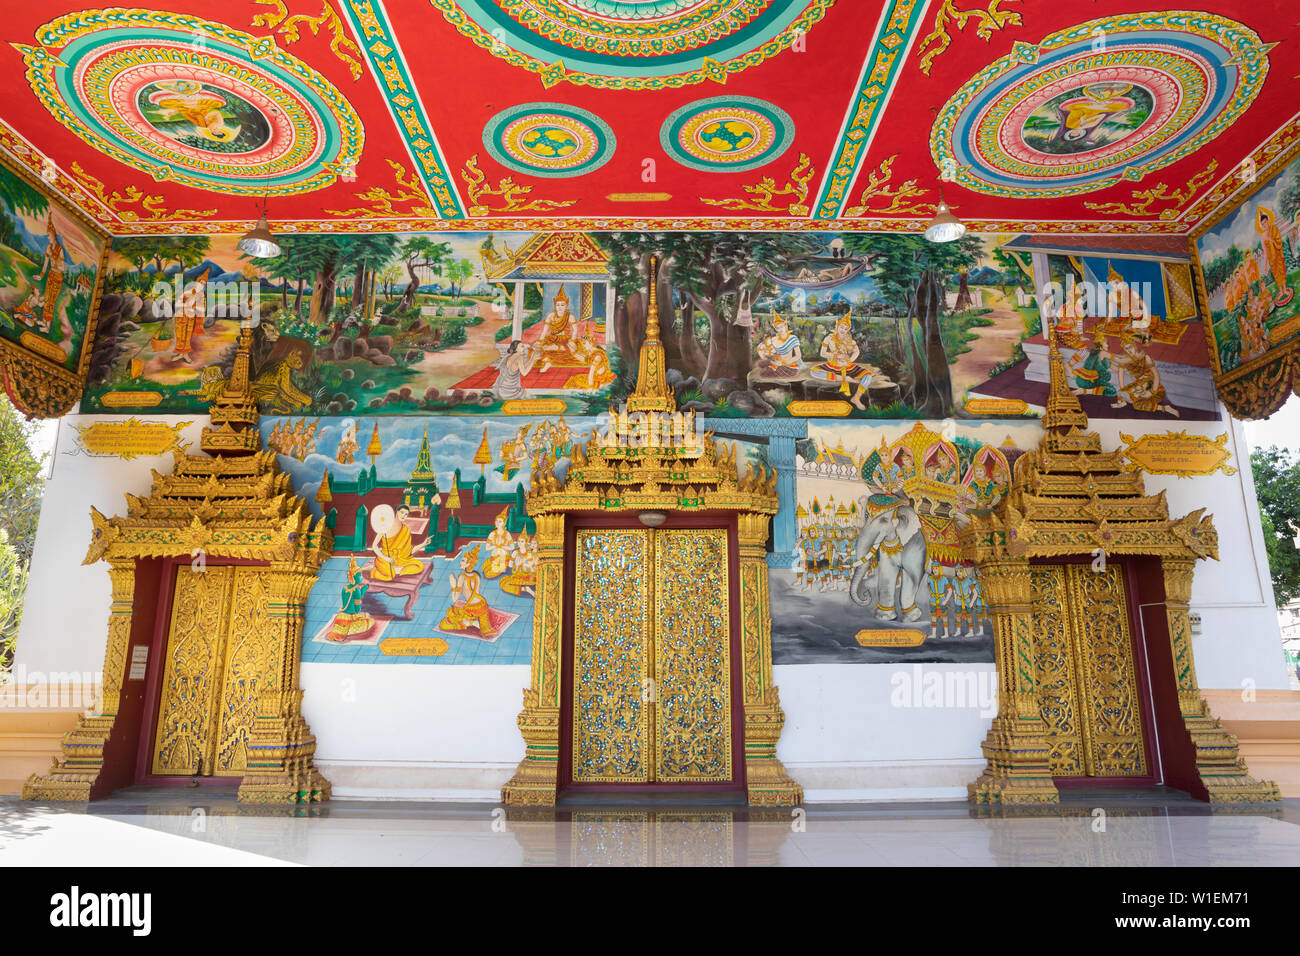 Murals and golden doors at the entrance of the Wat Inpeng Buddhist temple, Rue Samsenthai, Vientiane, Laos, Indochina, Southeast Asia, Asia Stock Photo